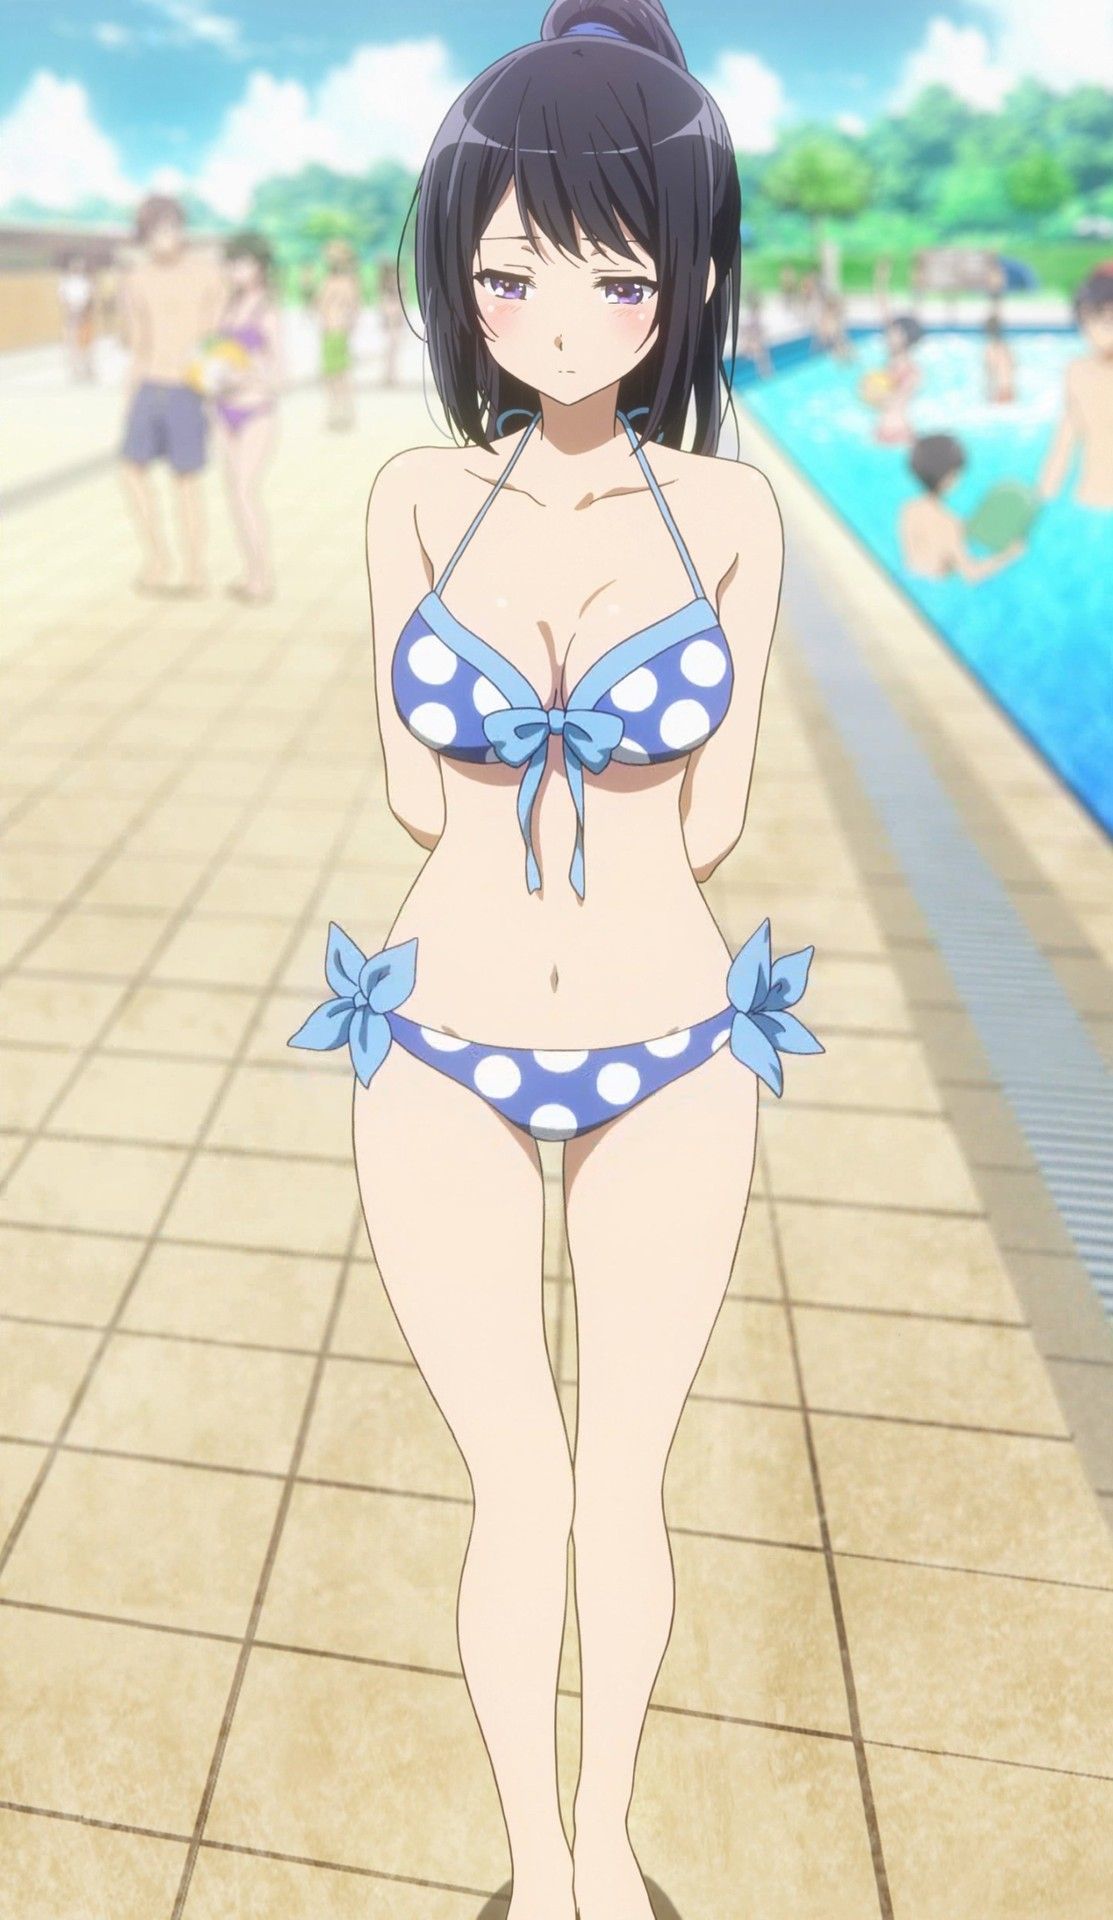 [Image] "resound! Euphonium 2 ' 2 story, Rena's big breasts swimsuit appearance エロッォオオオ! 1